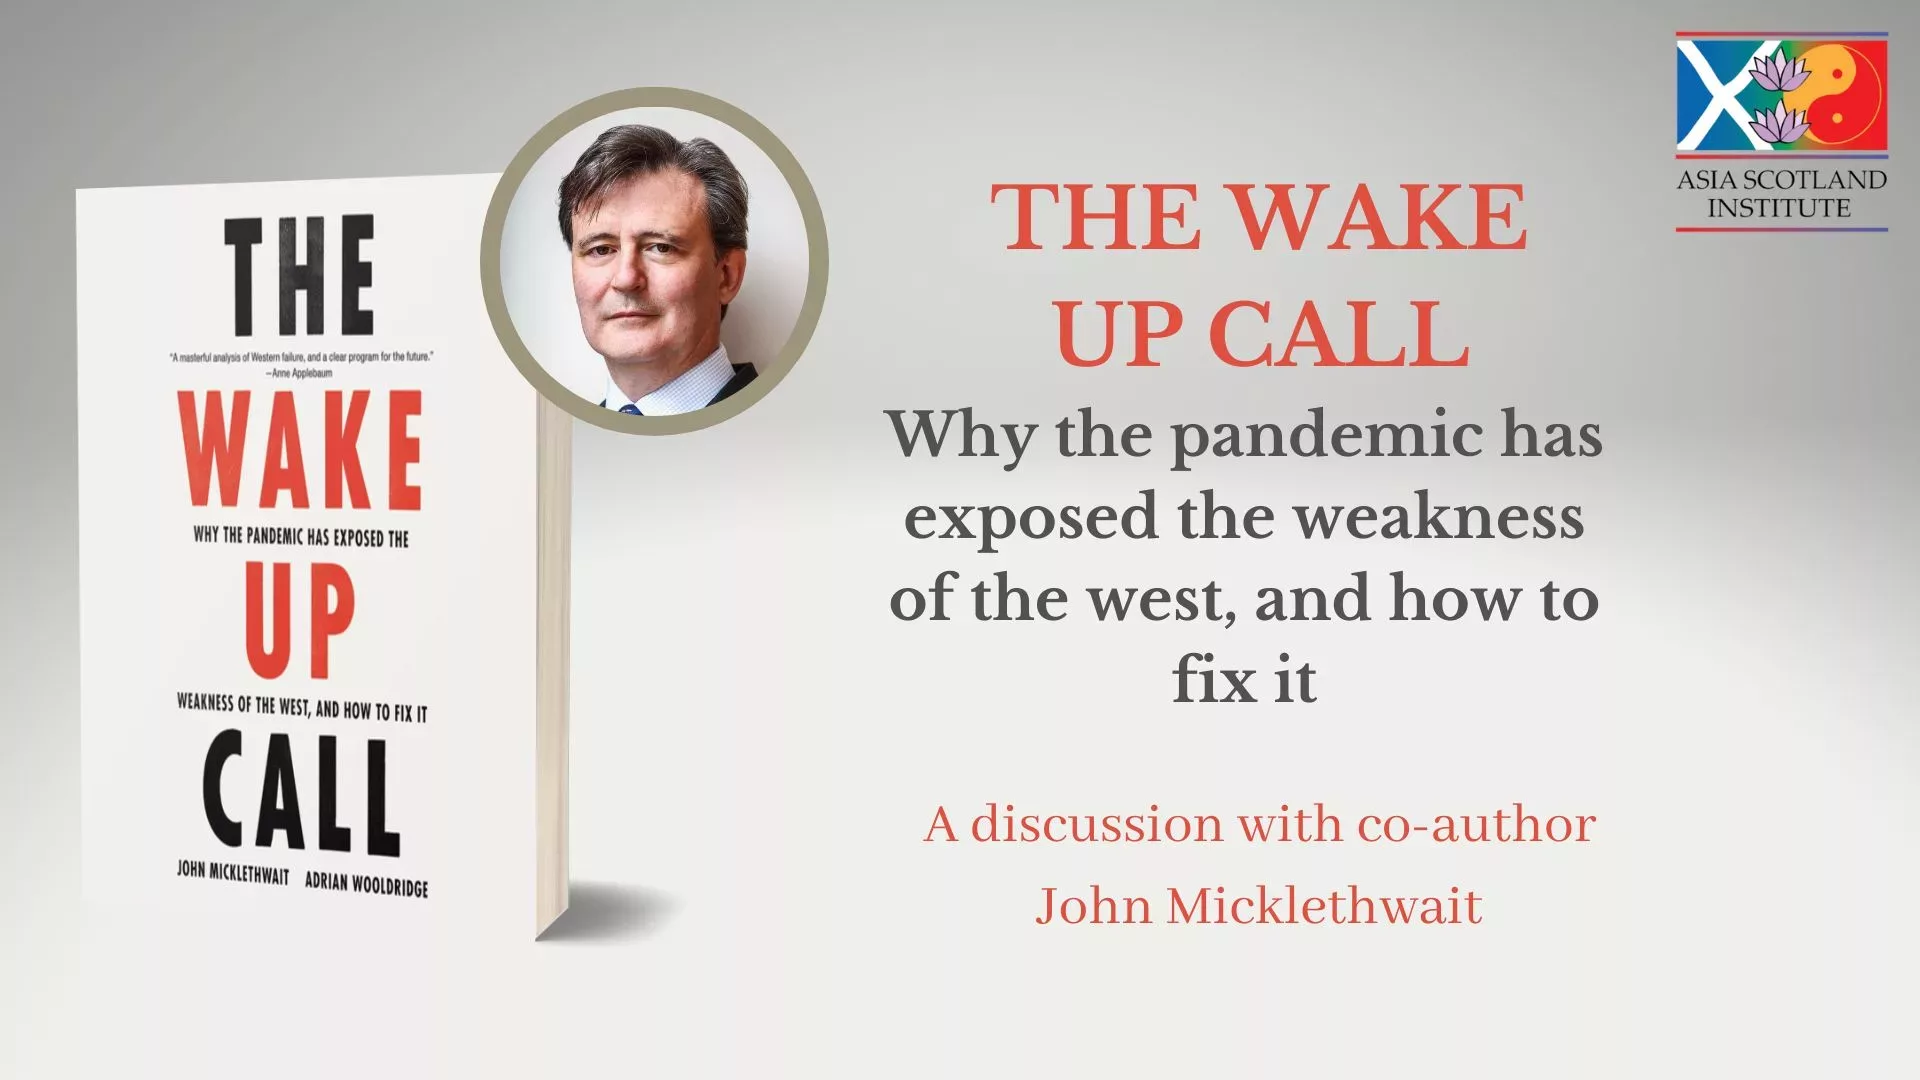 THE WAKE UP CALLWhy the pandemic has exposed the weakness of the west, and how to fix it